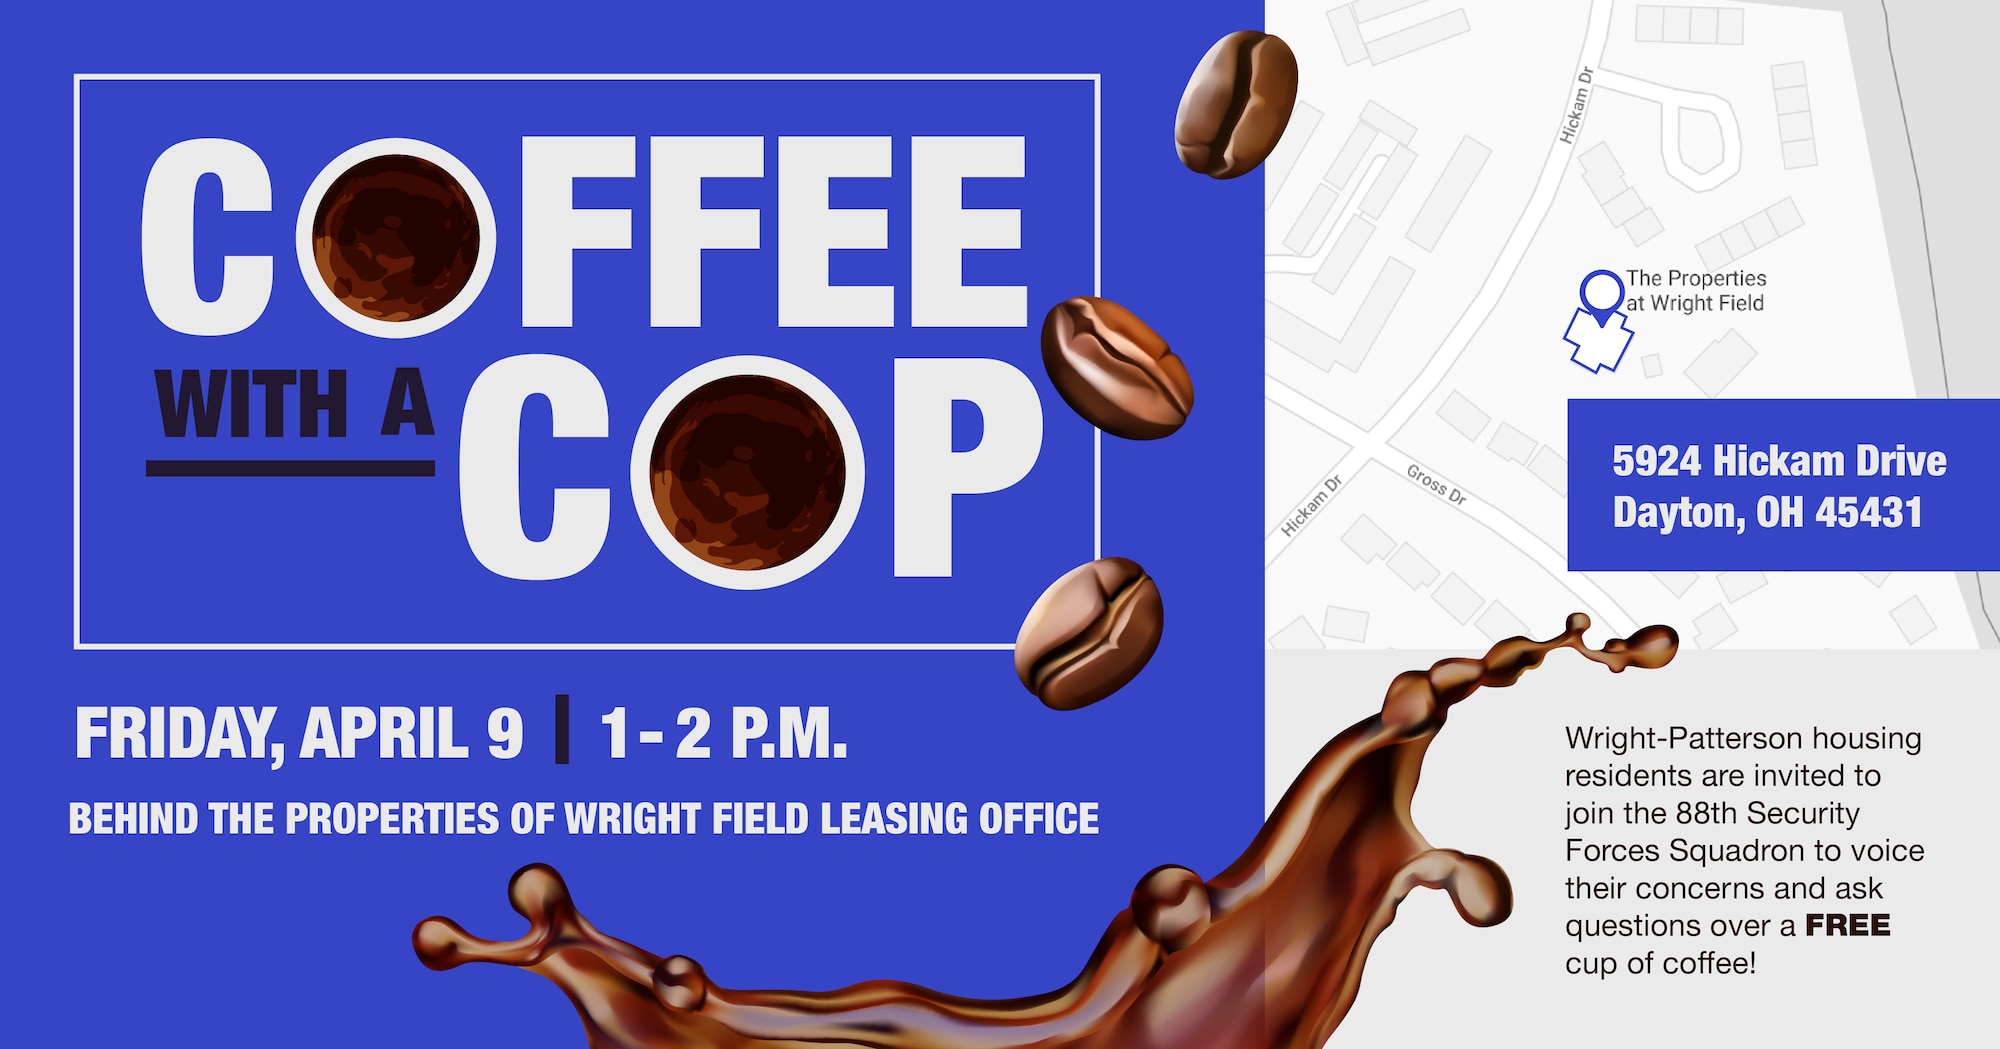 The 88th Security Forces Squadron will hold its next “Coffee with a Cop” on April 9 from 1 to 2 p.m. behind the Properties of Wright Field leasing office.